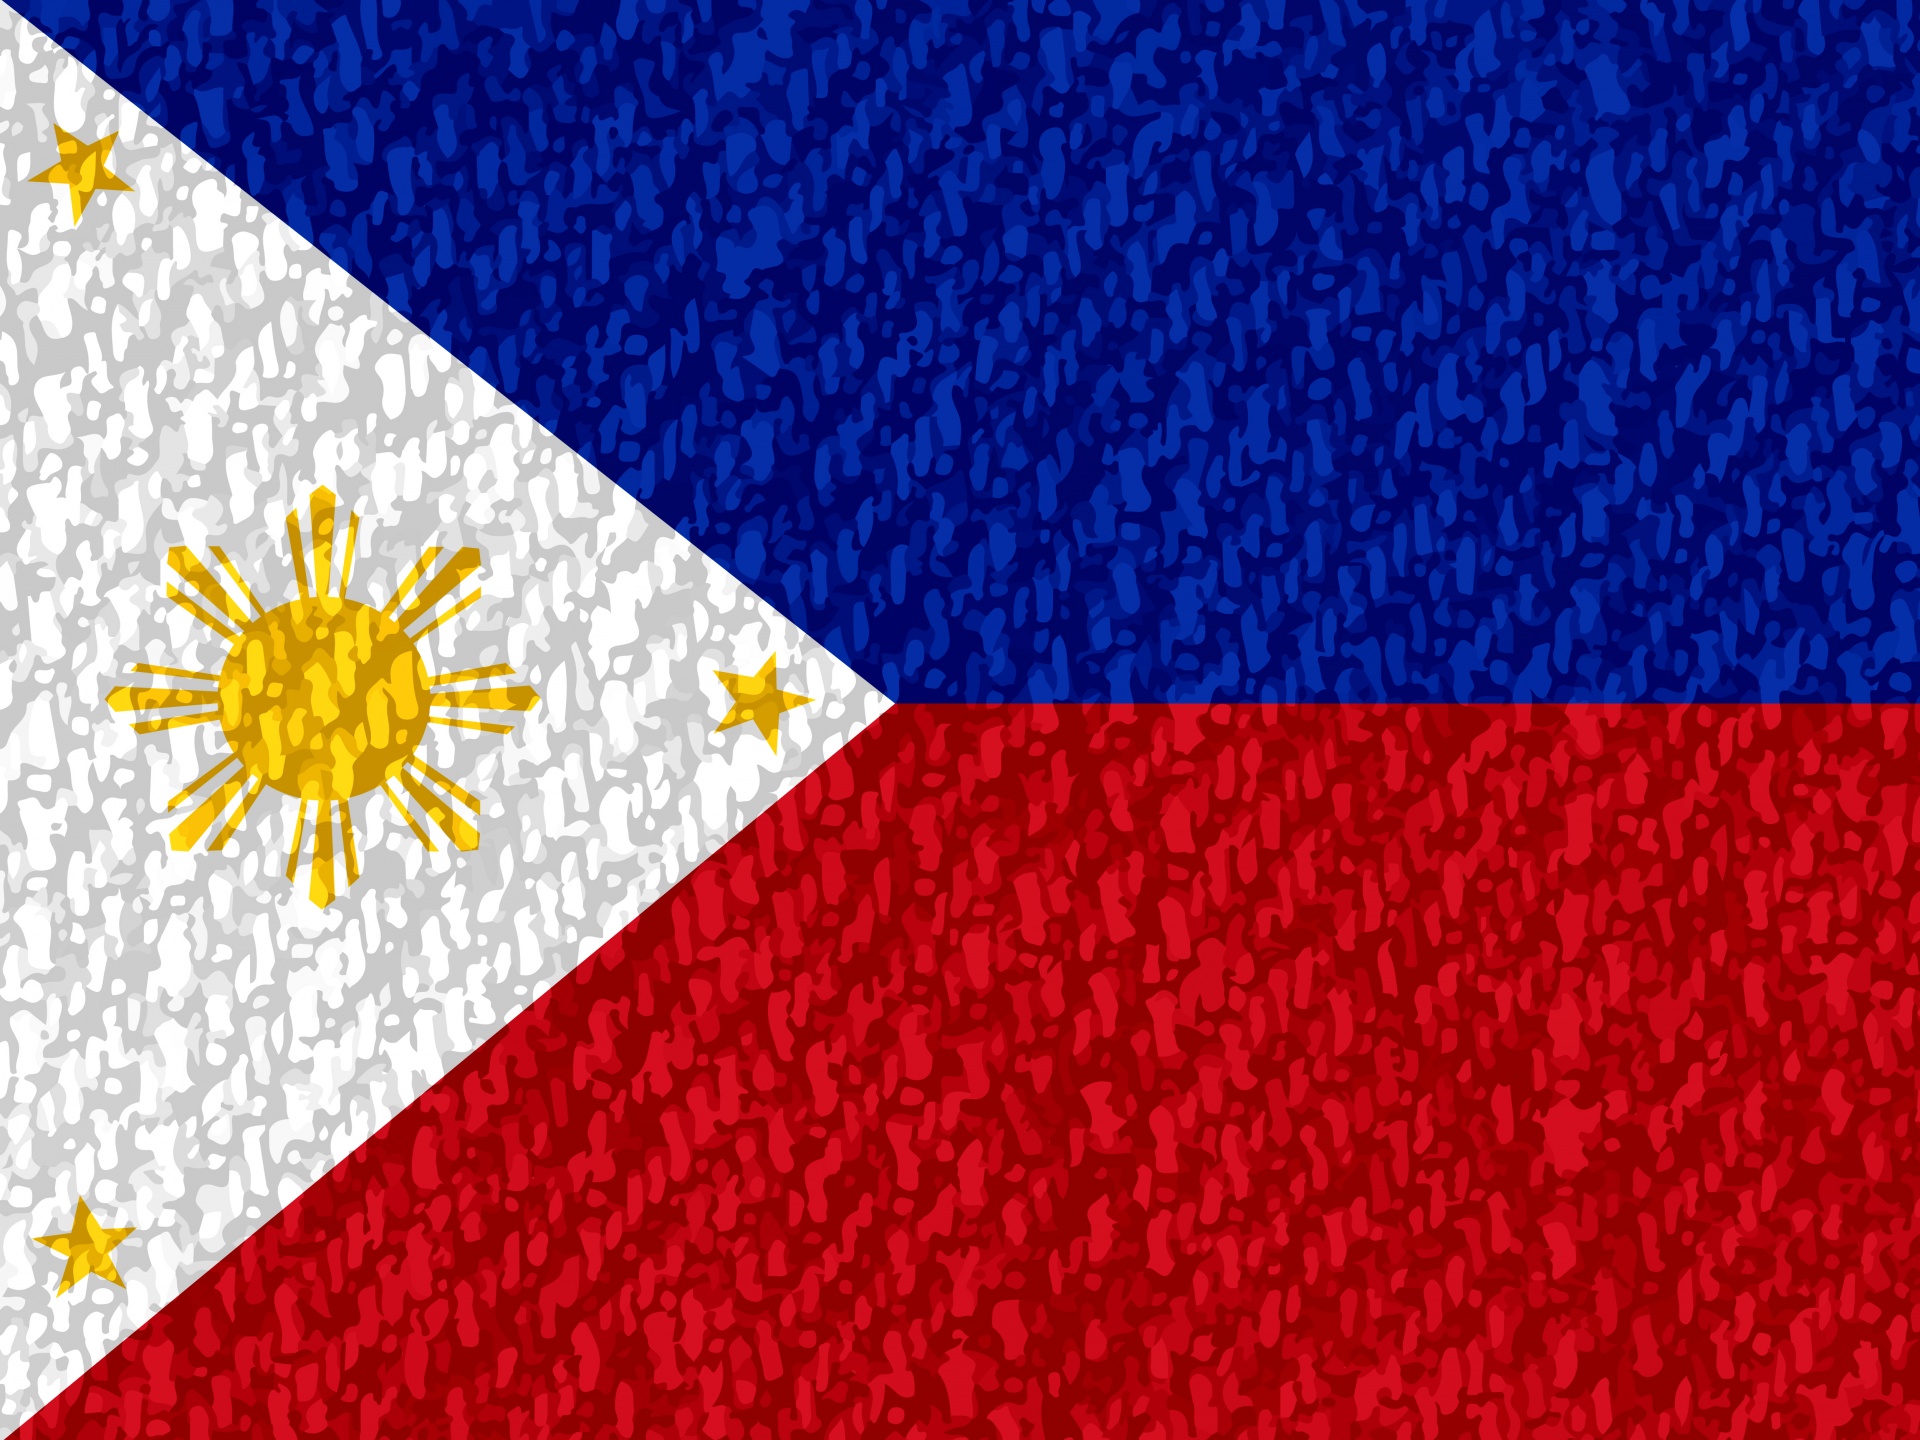 photo essay about philippine flag